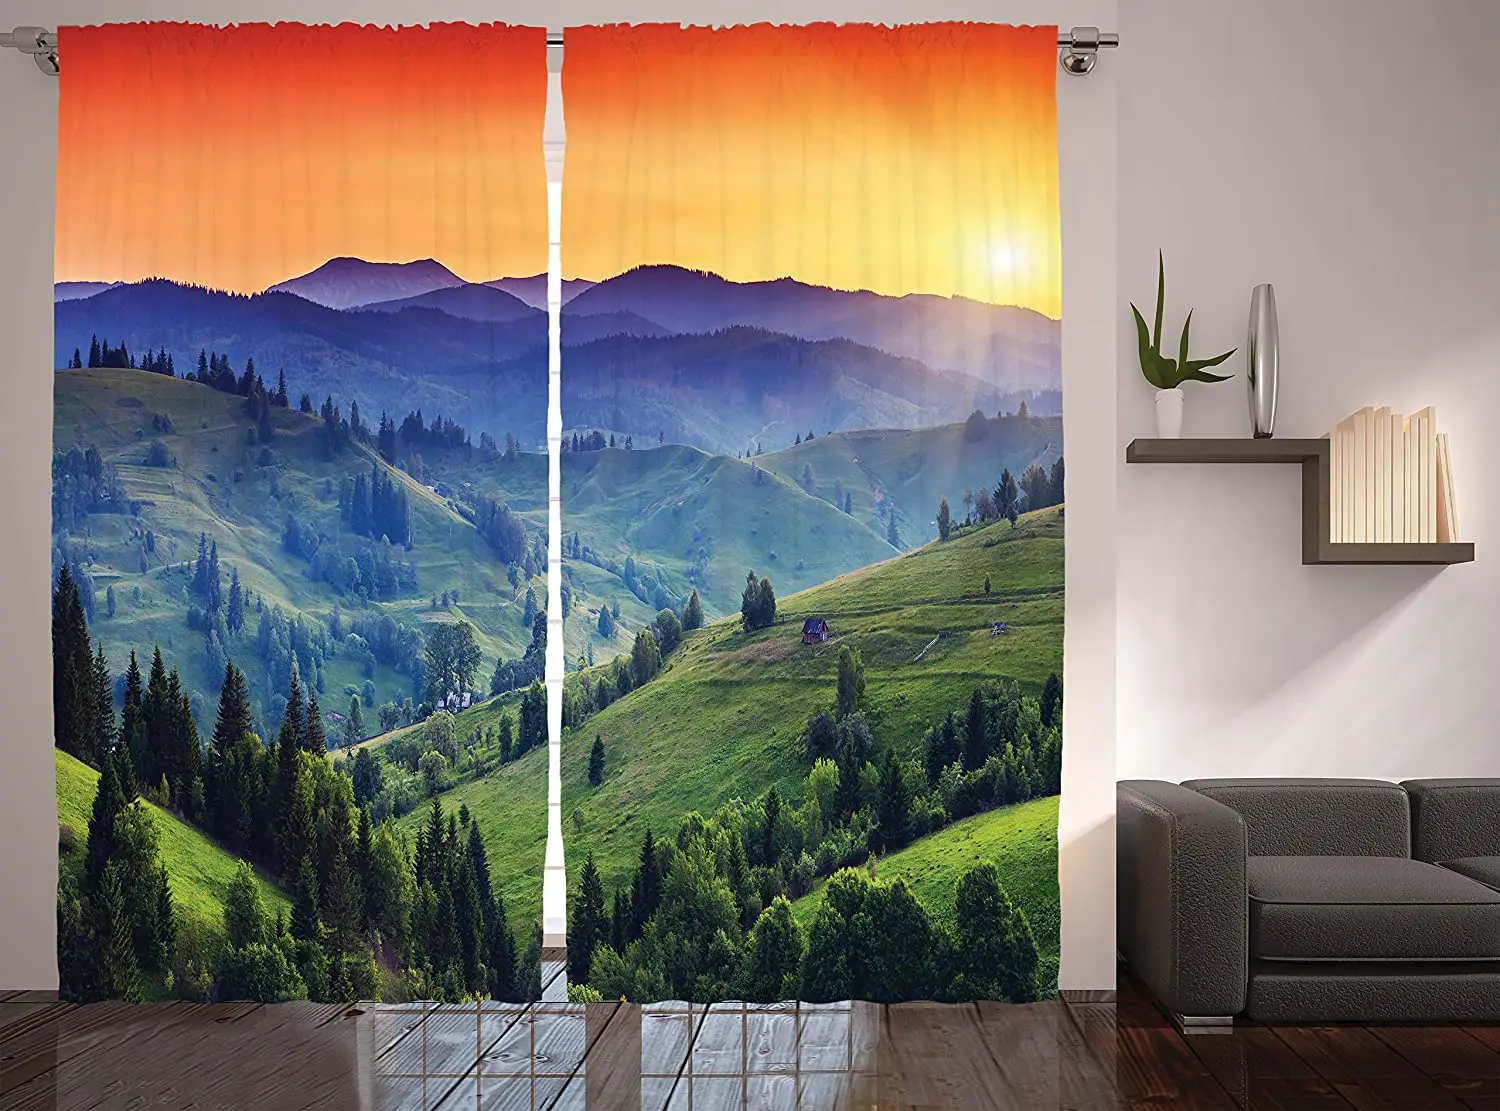 

Mountain Curtains Colorful Sunset in European Countryside Landscape Rural Trees Greenery Living Room Bedroom Window Drapes